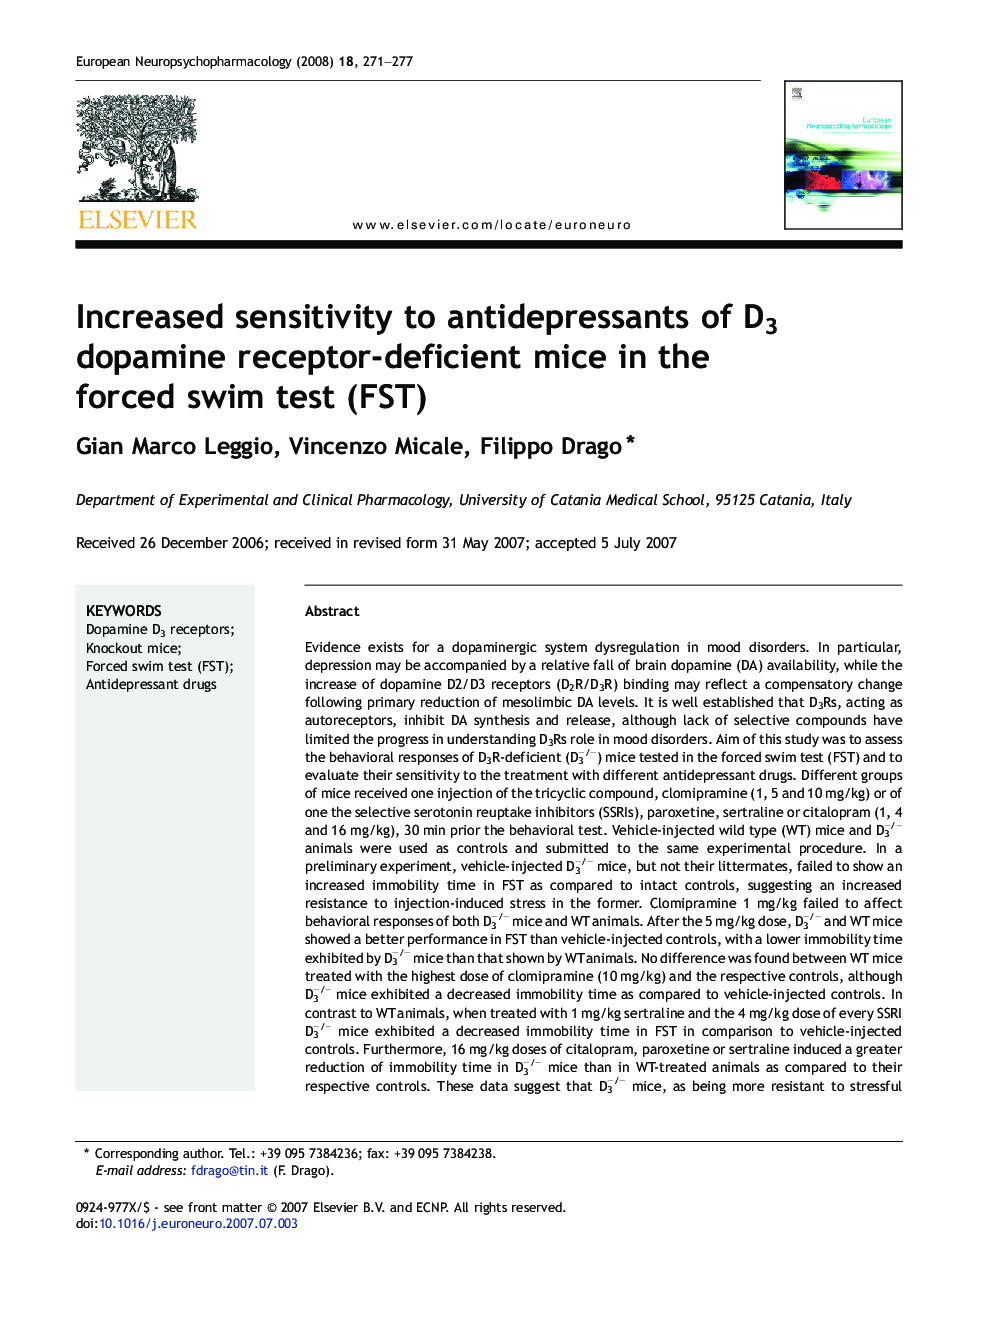 Increased sensitivity to antidepressants of D3 dopamine receptor-deficient mice in the forced swim test (FST)